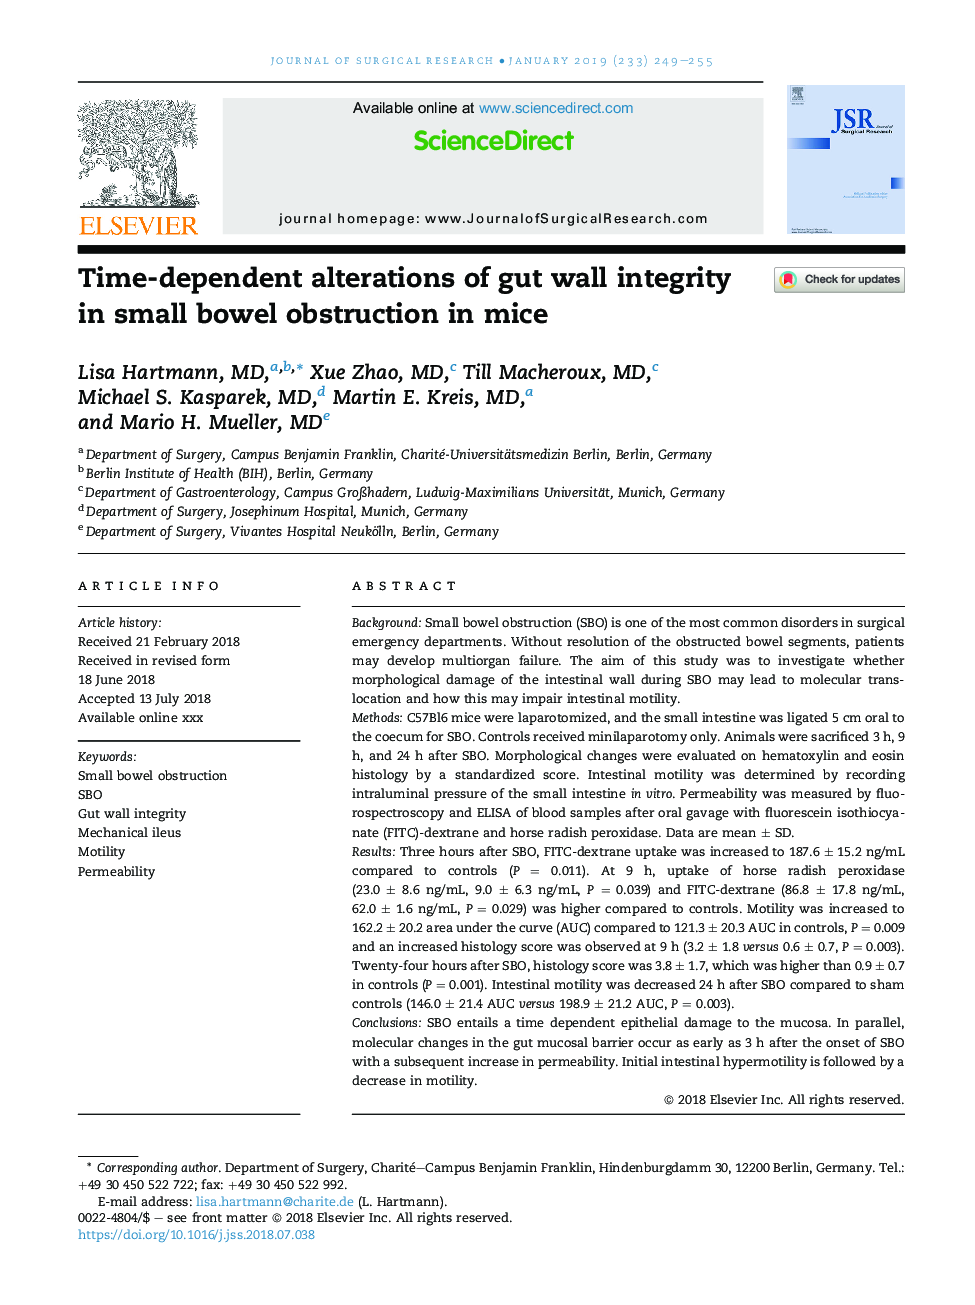 Time-dependent alterations of gut wall integrity in small bowel obstruction in mice